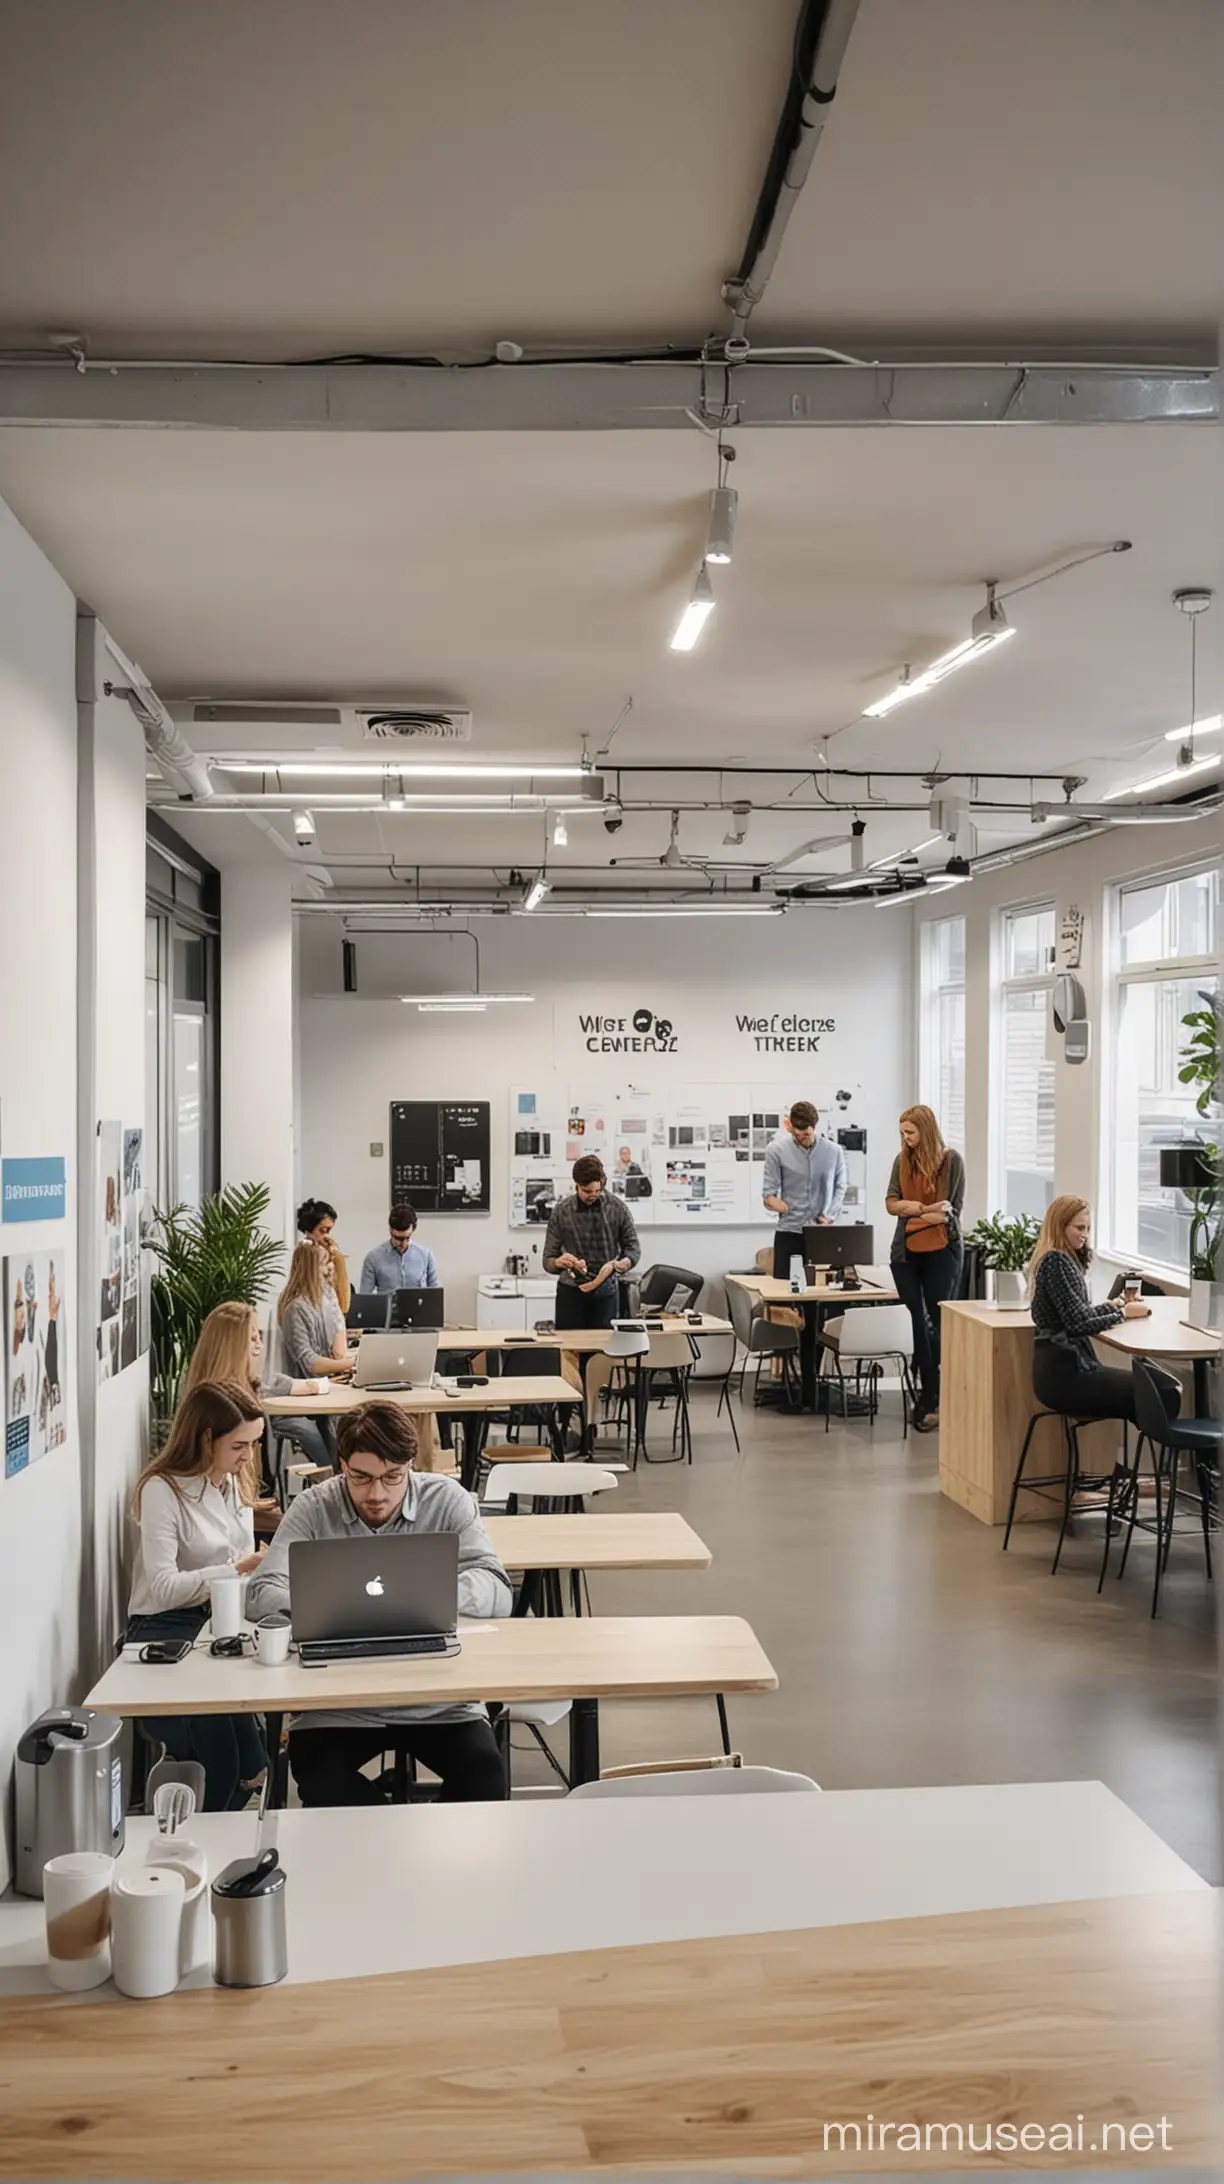 Diverse Professionals Working in a Modern CoWorking Space with Amenities